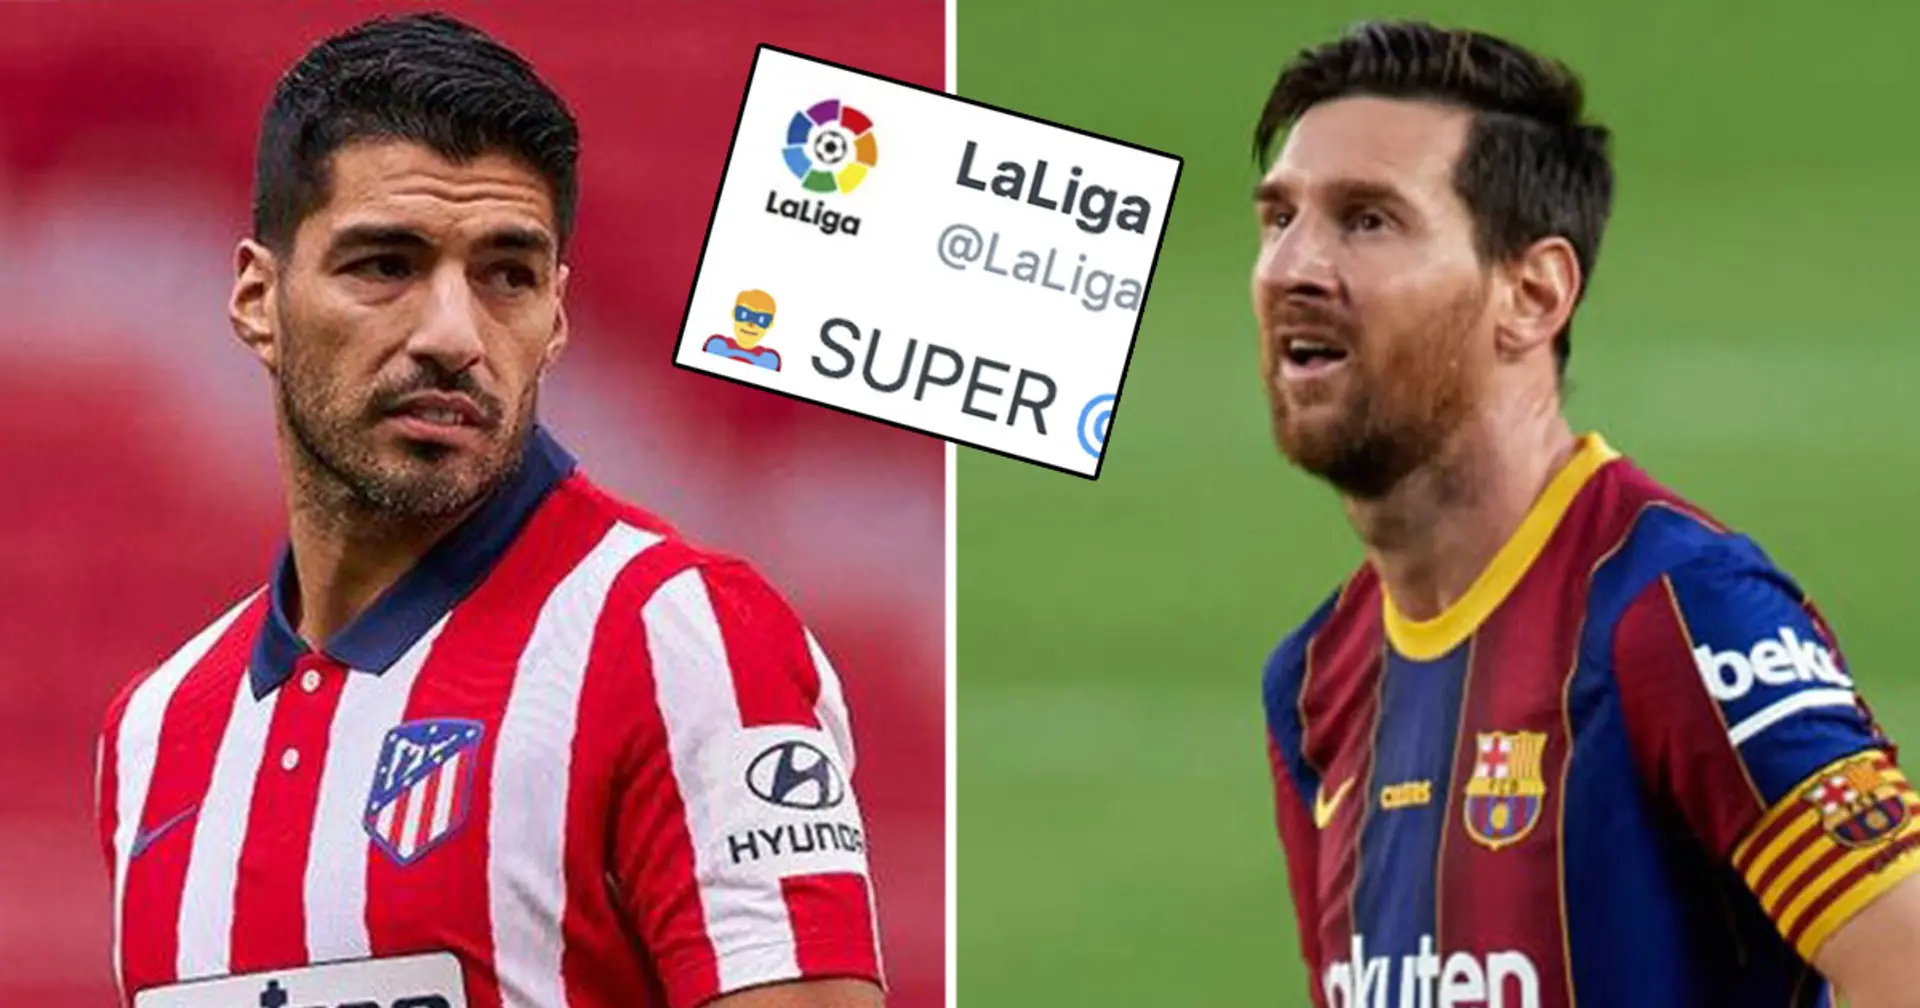 'He must've won Atletico 15 points': La Liga Player of the Season award goes to Atletico – but not to Suarez